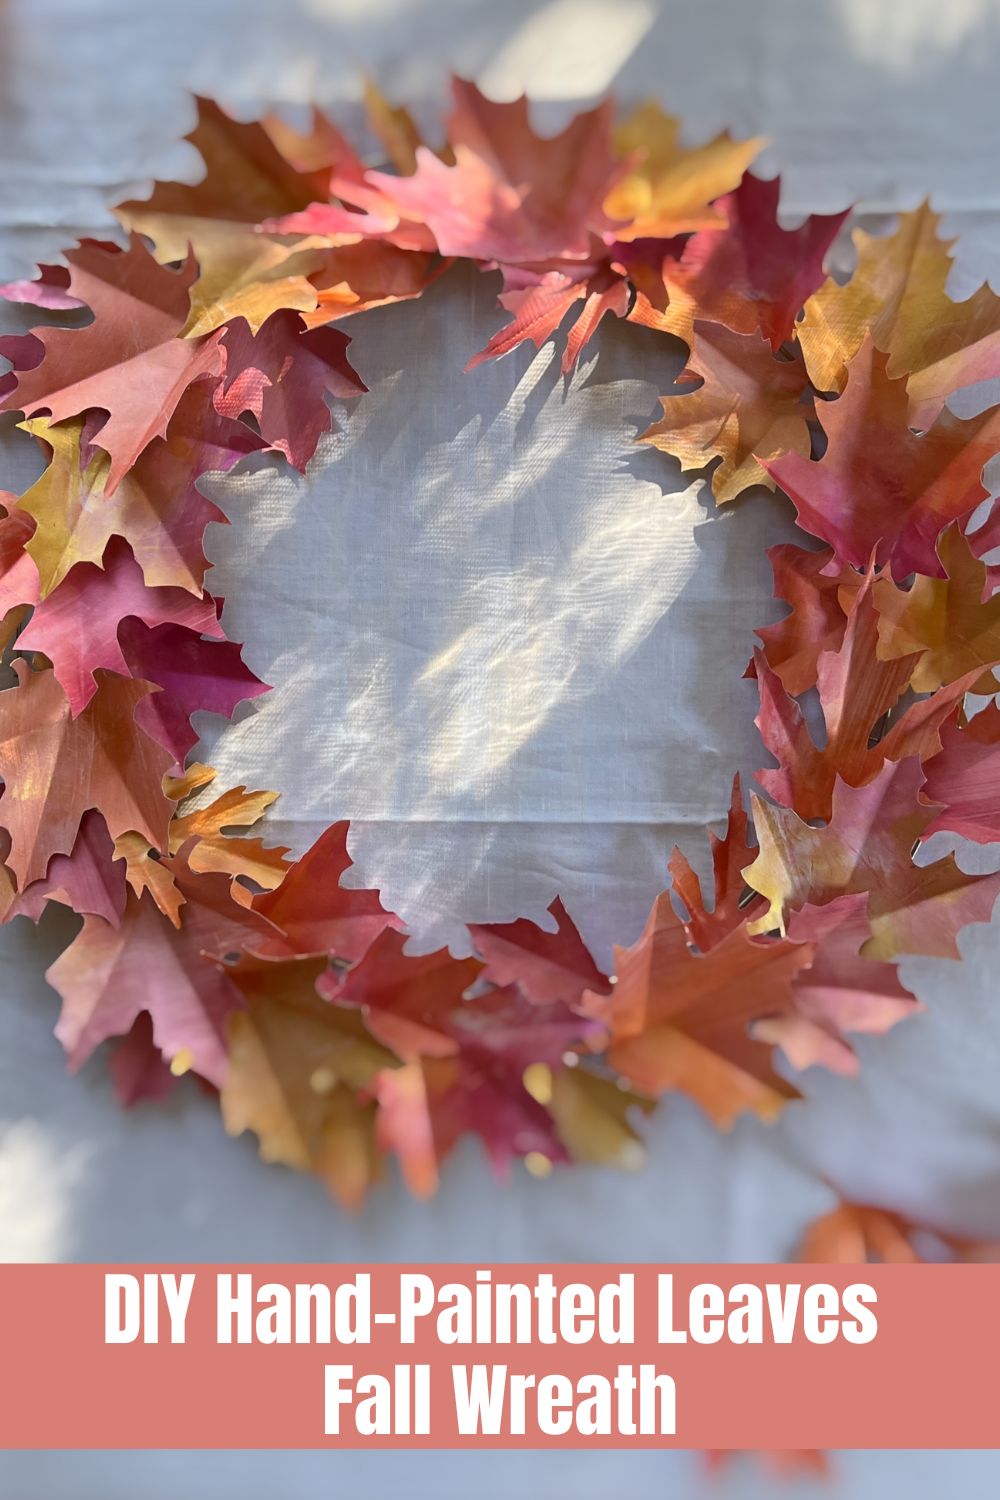 Today, I am combining two of my favorite things, painting, and crafting. I made beautiful hand painted leaves and then a door wreath.